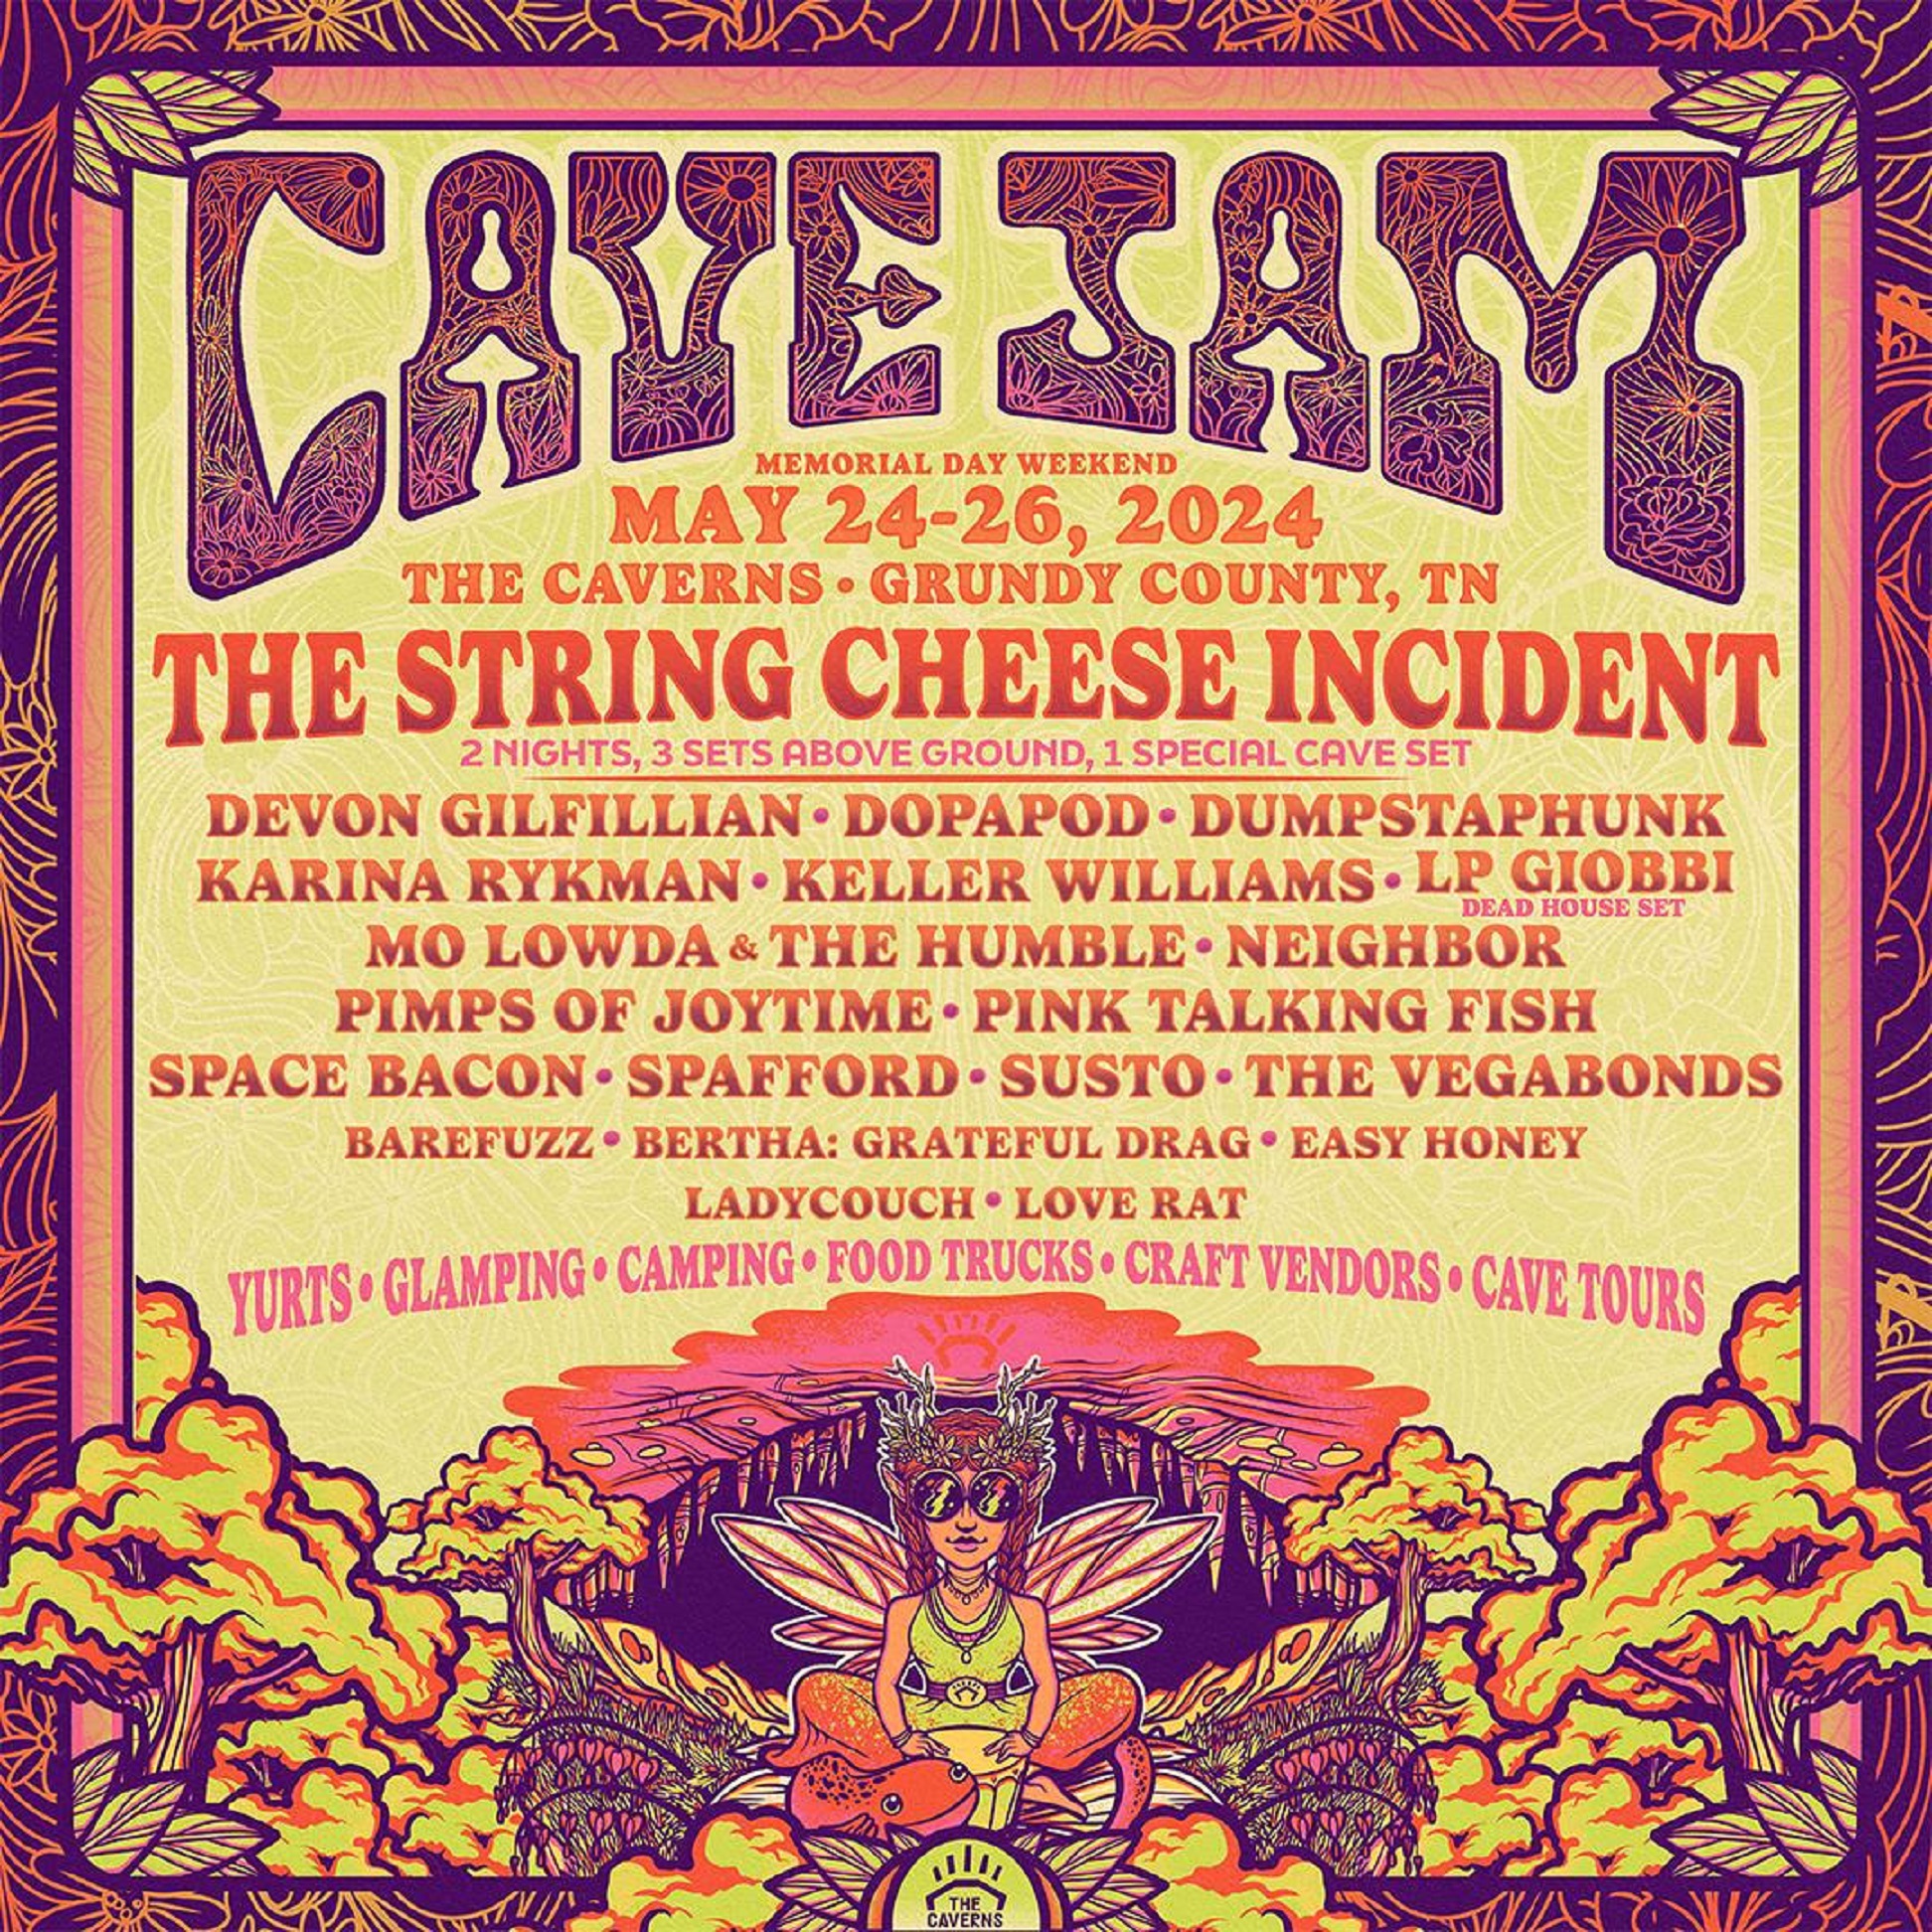 CaveJam, New Festival at The Caverns feat. The String Cheese Incident & More